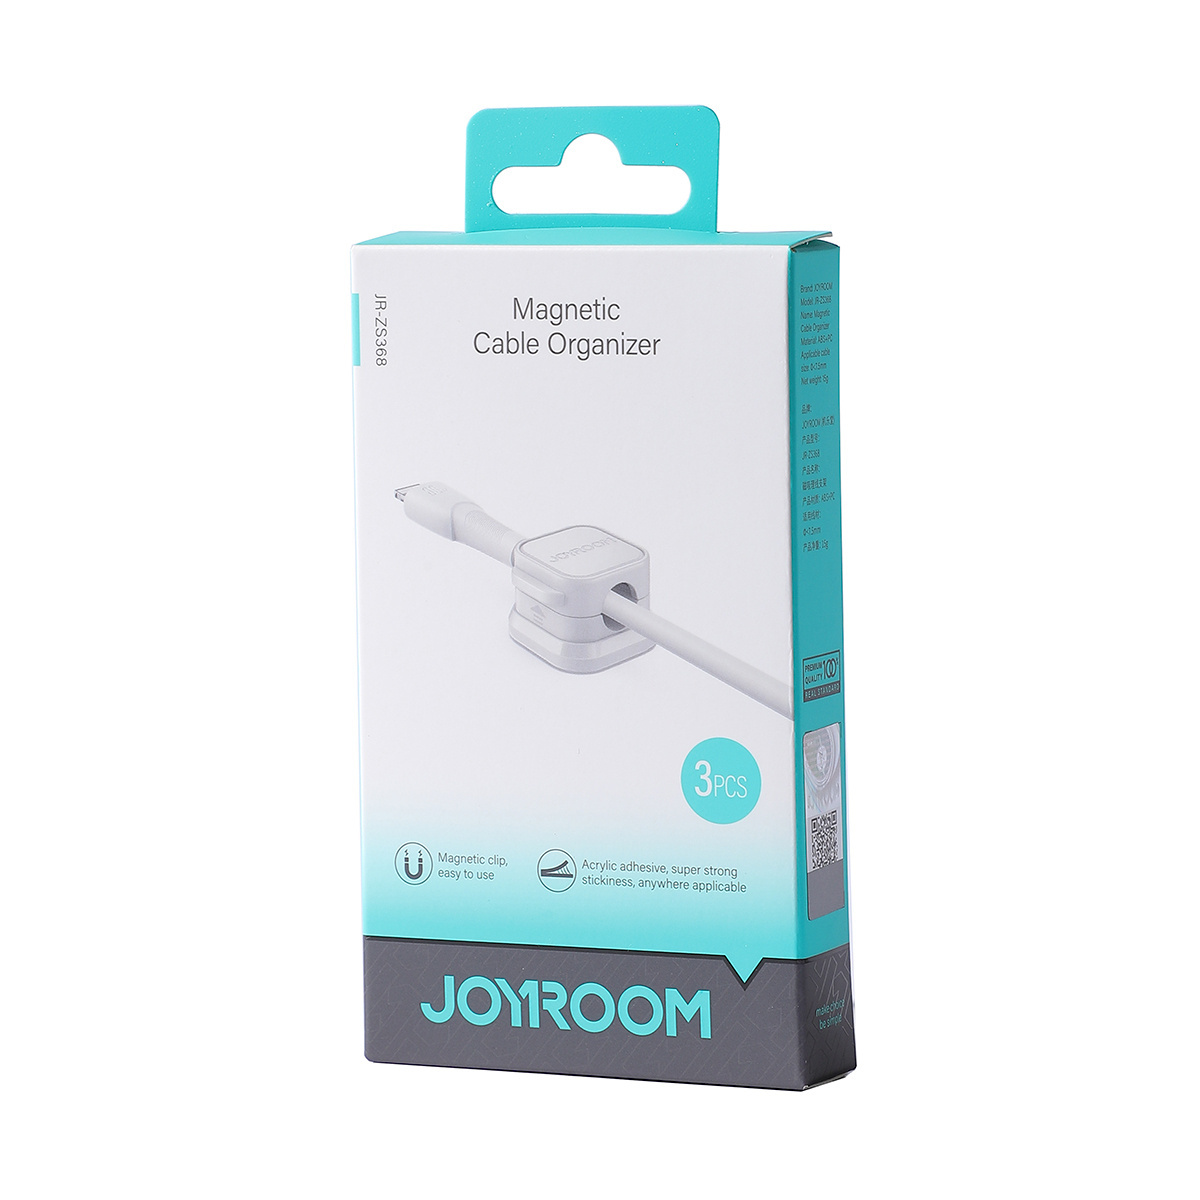 Joyroom JR-ZS368 cable organizer magnetic white [3 PACK]